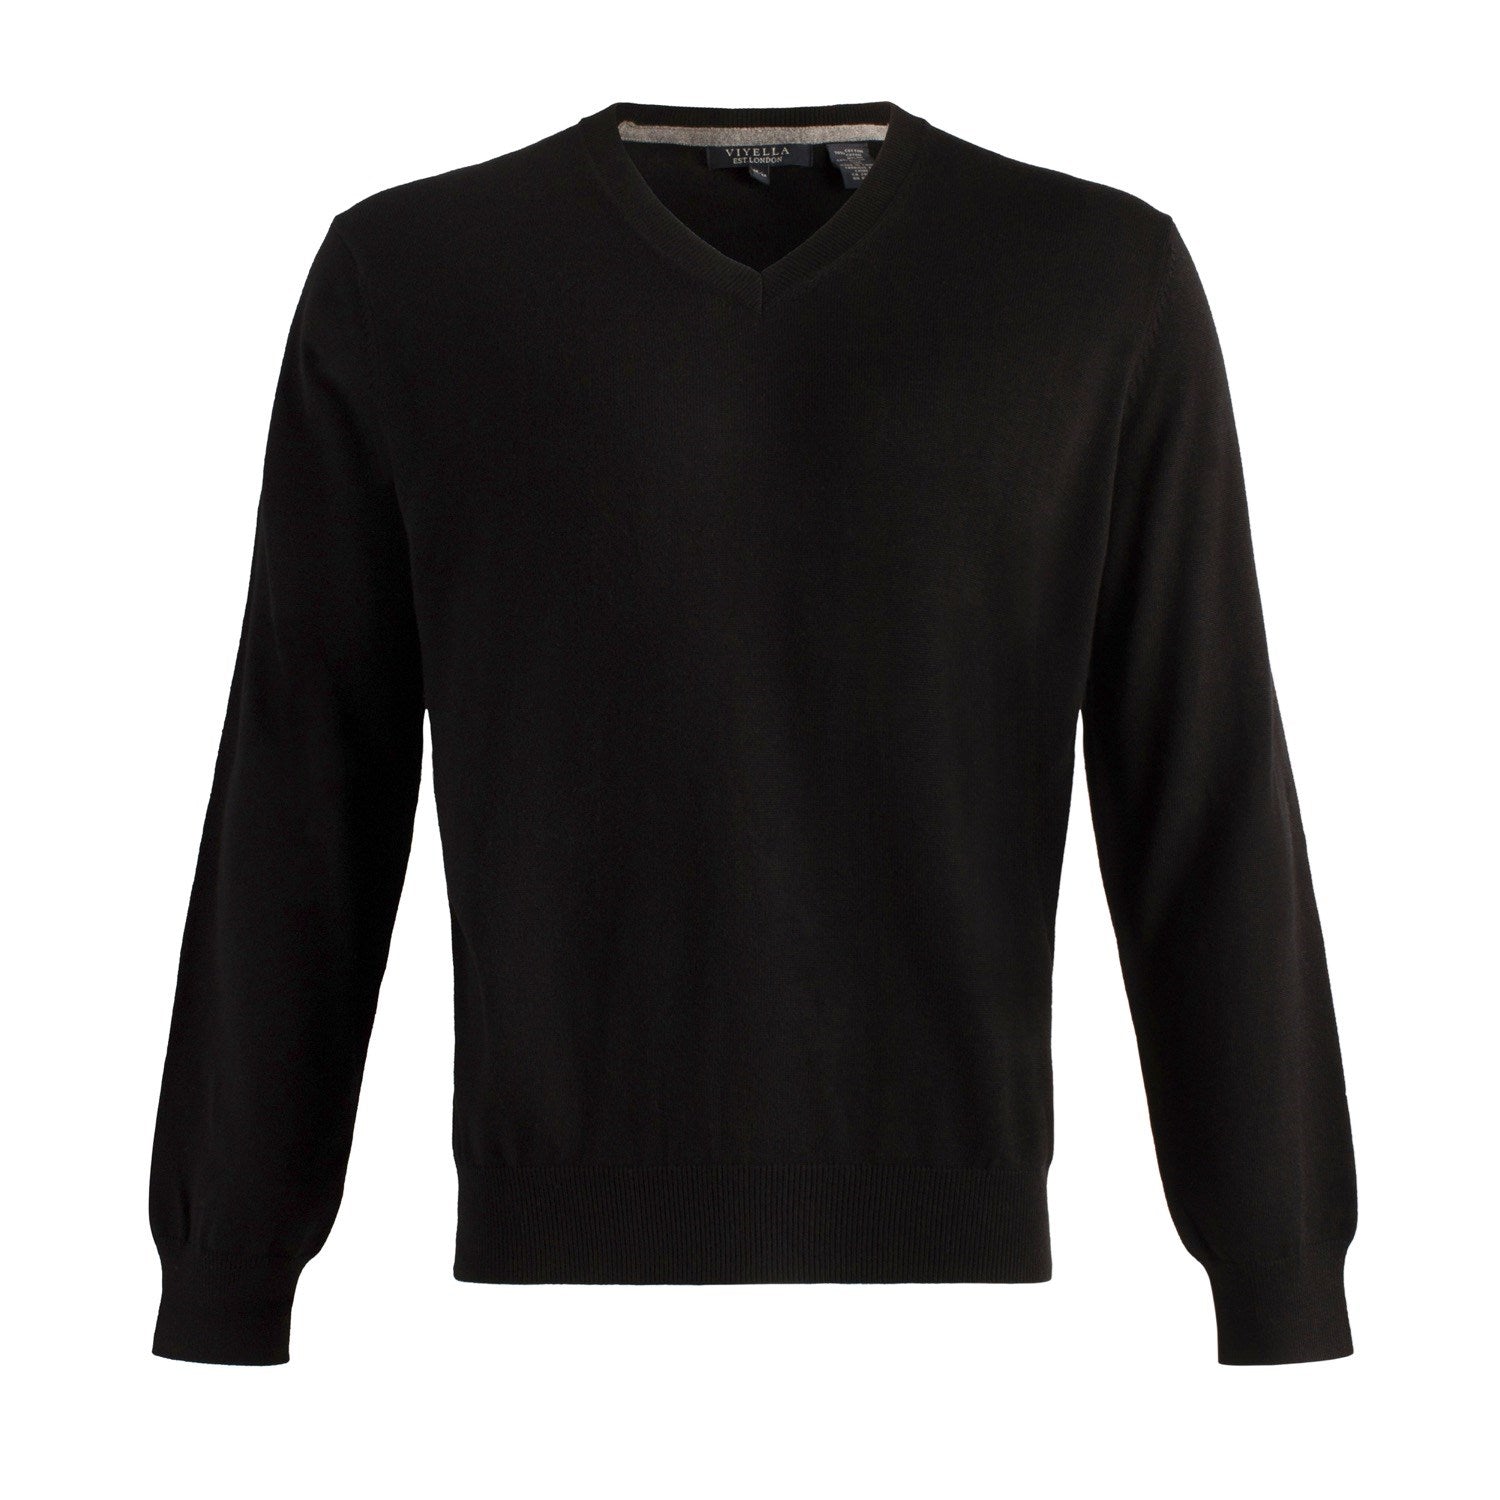 Cotton and Silk Blend Elbow Patch V-Neck Sweater in Black by Viyella